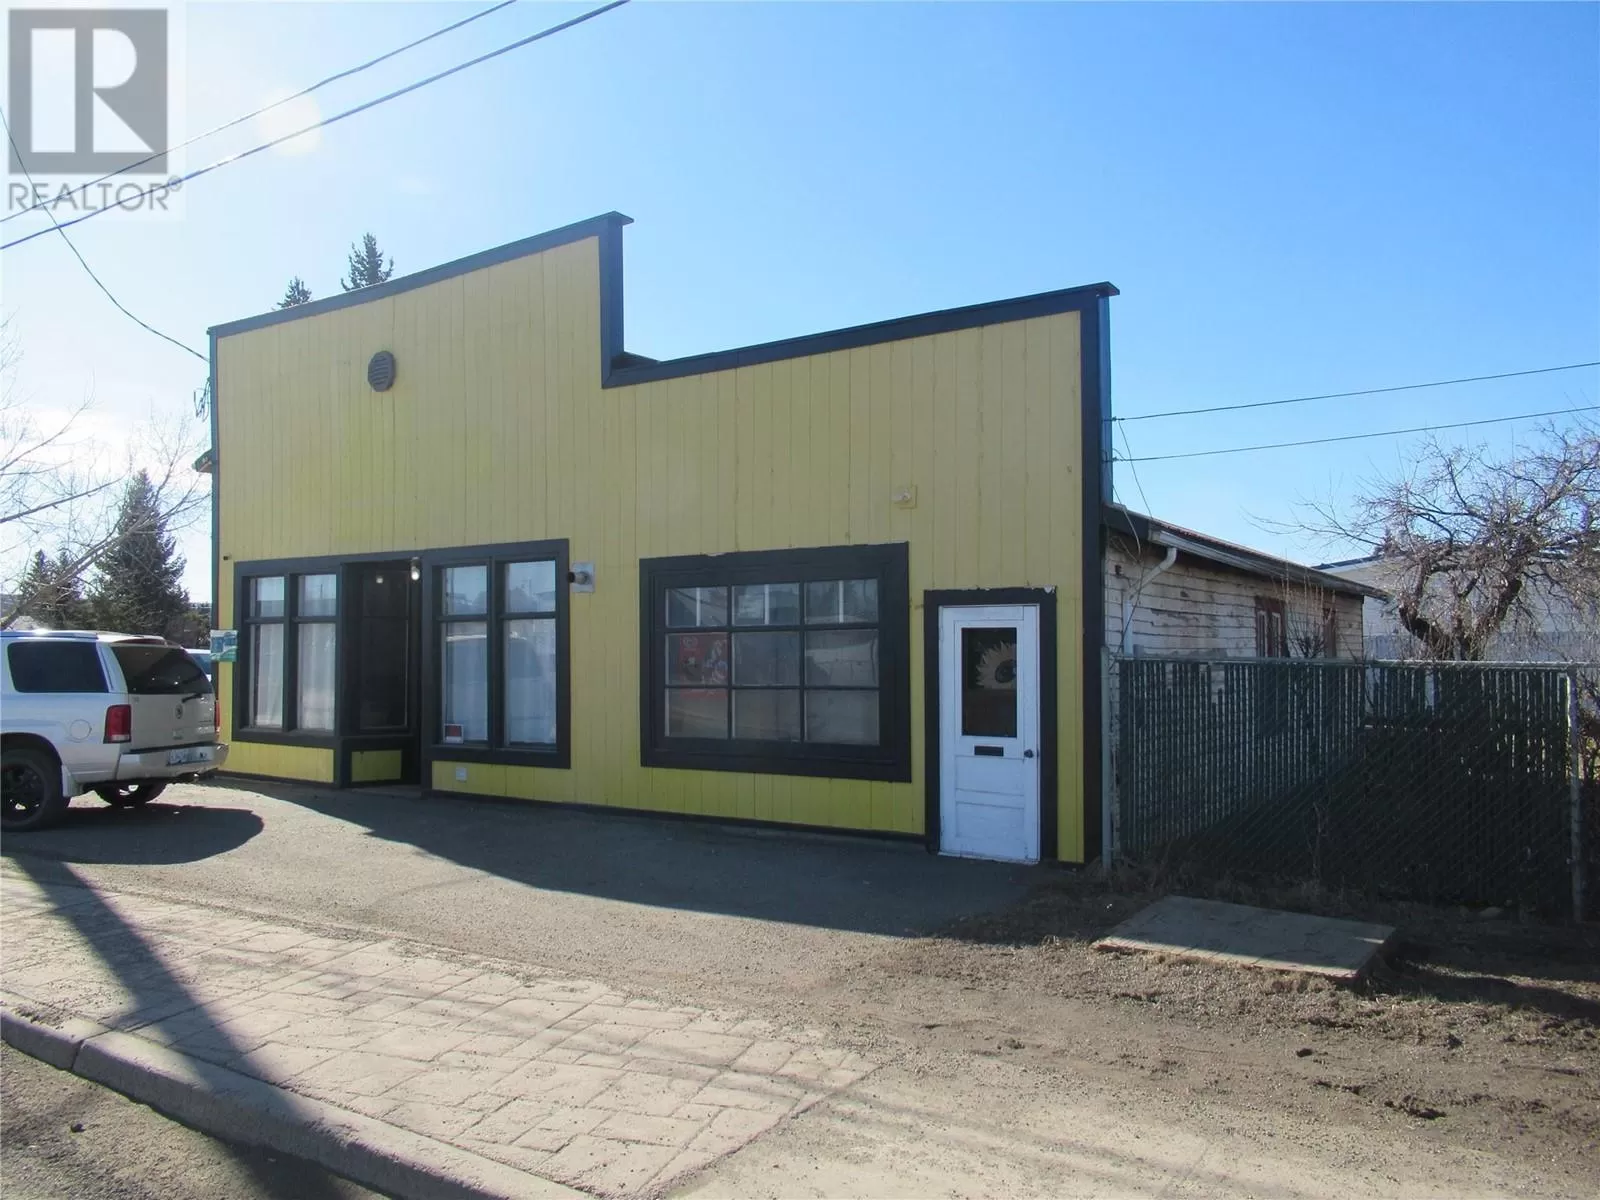 Residential Commercial Mix for rent: 4928 50 Avenue, Pouce Coupe, British Columbia V0C 2C0